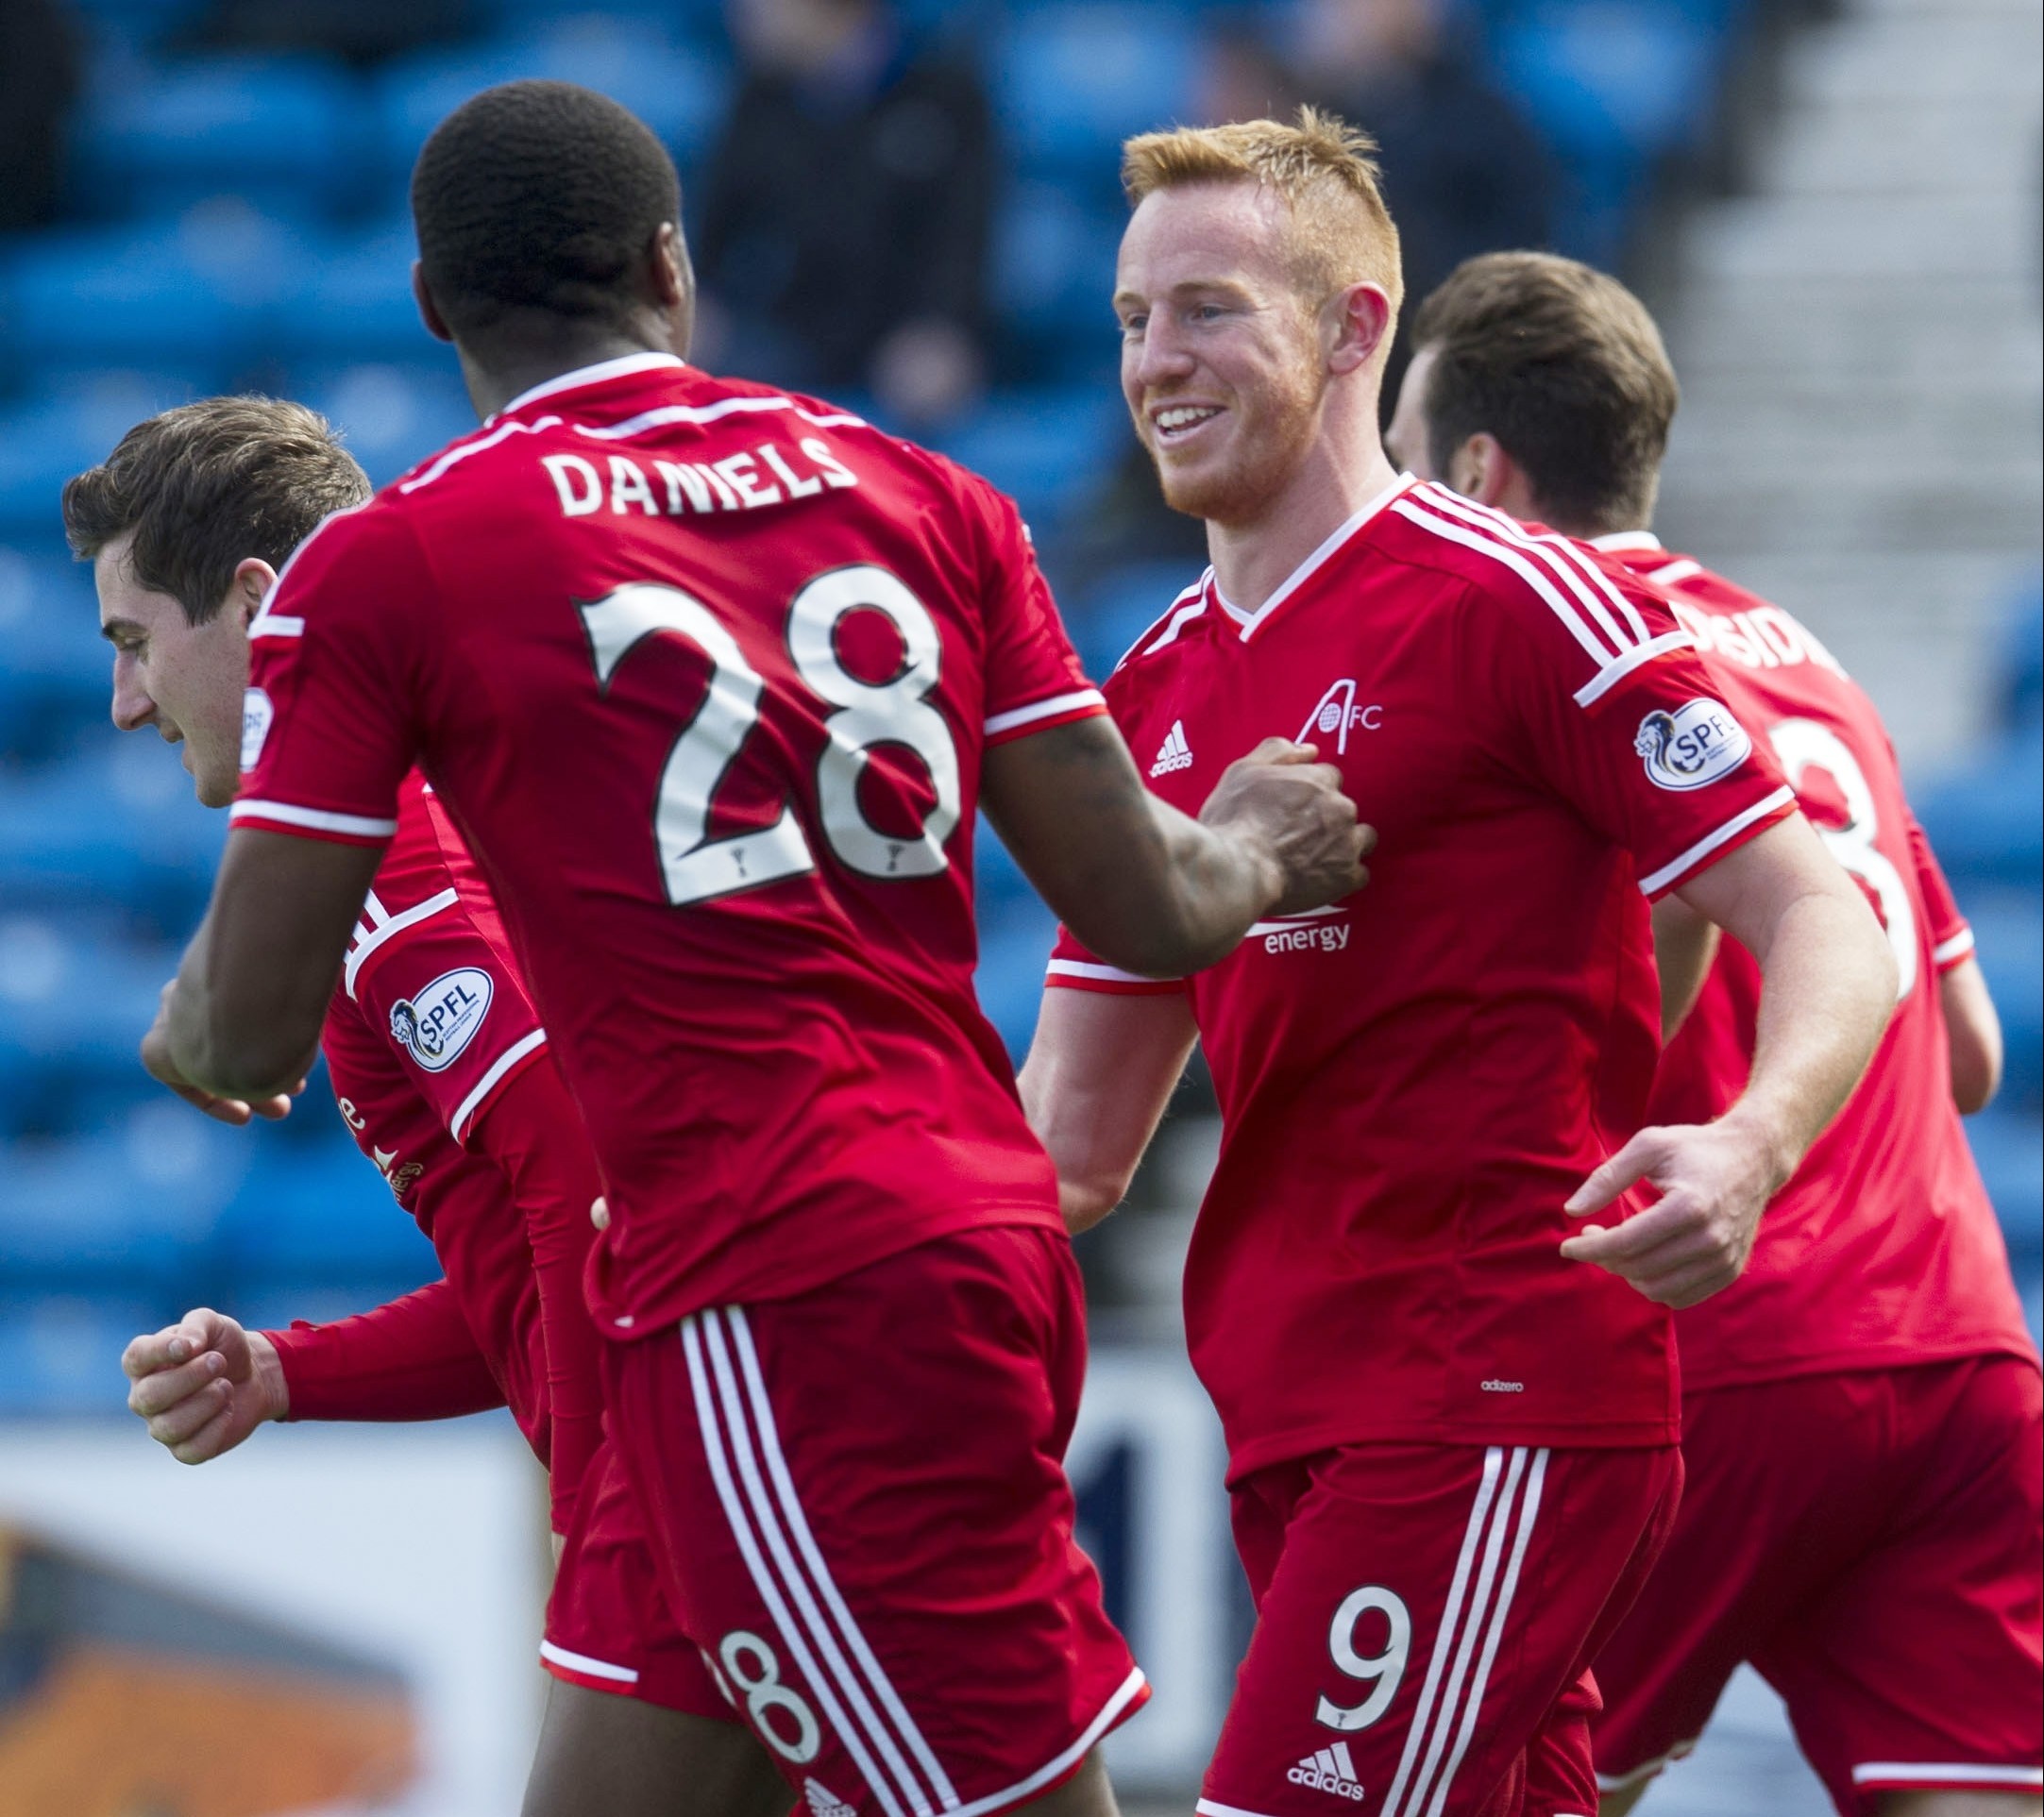 Adam Rooney and Don Daniels celebrate after the duo combined for Aberdeen's opening goal